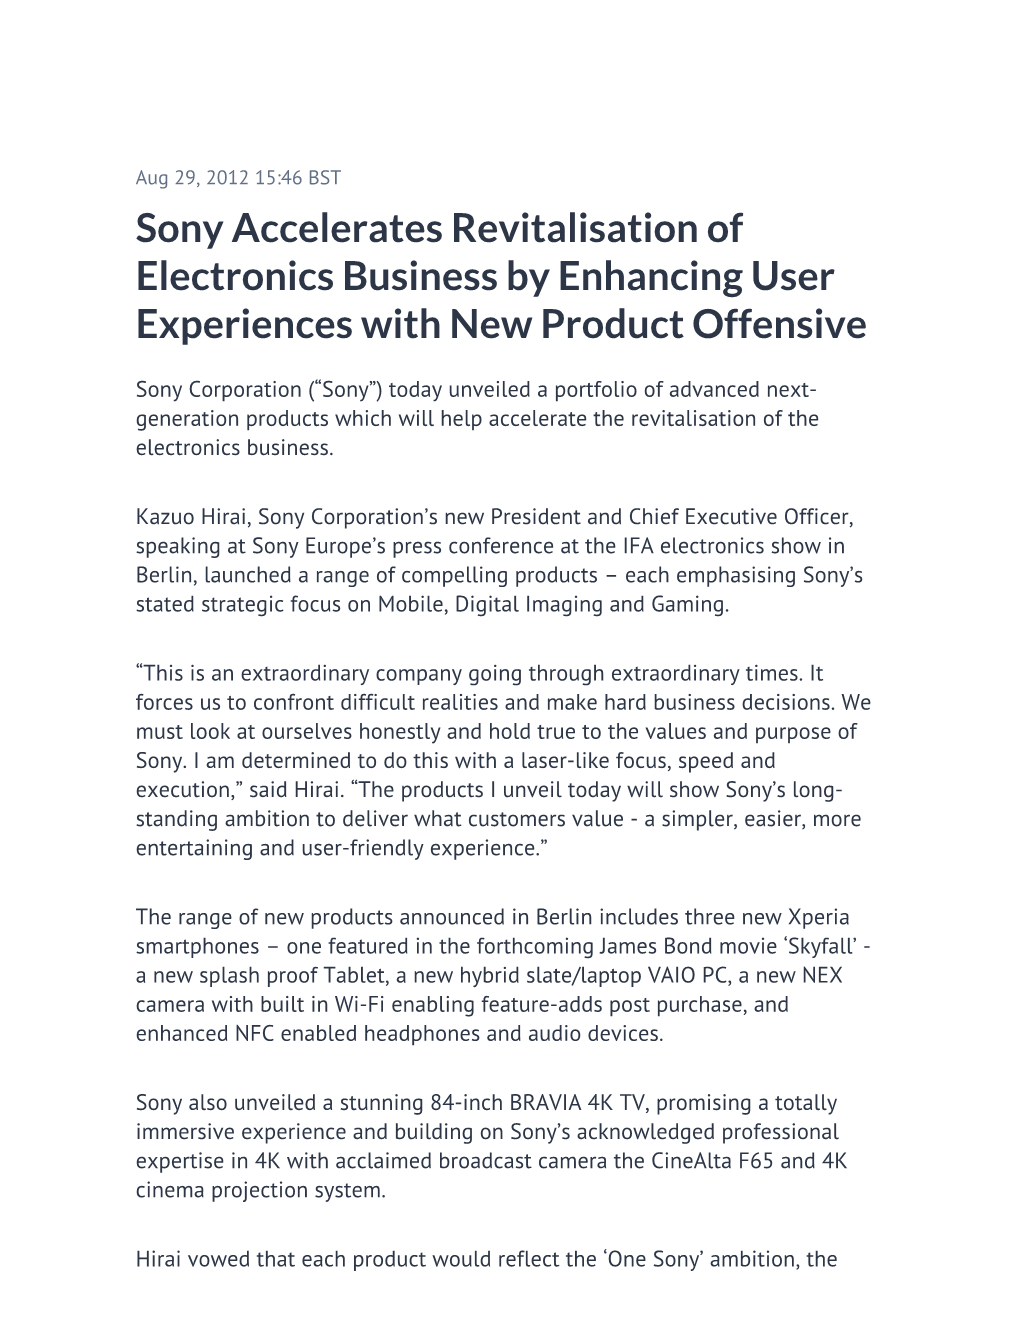 Sony Accelerates Revitalisation of Electronics Business by Enhancing User Experiences with New Product Offensive